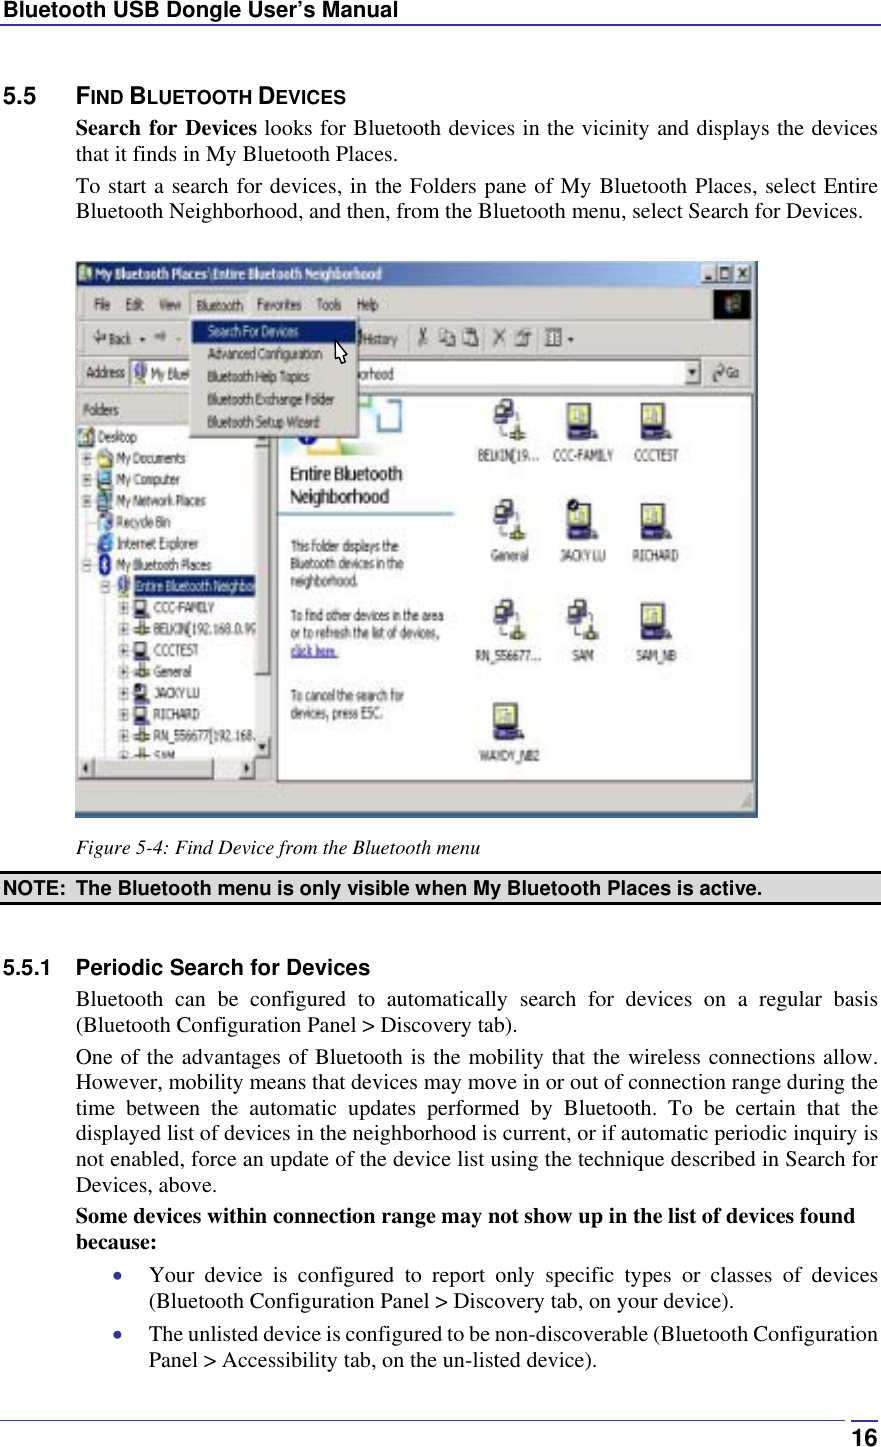 Bluetooth USB Dongle User’s Manual  165.5 FIND BLUETOOTH DEVICES Search for Devices looks for Bluetooth devices in the vicinity and displays the devices that it finds in My Bluetooth Places. To start a search for devices, in the Folders pane of My Bluetooth Places, select Entire Bluetooth Neighborhood, and then, from the Bluetooth menu, select Search for Devices.   Figure 5-4: Find Device from the Bluetooth menu NOTE:  The Bluetooth menu is only visible when My Bluetooth Places is active.  5.5.1 Periodic Search for Devices Bluetooth can be configured to automatically search for devices on a regular basis (Bluetooth Configuration Panel &gt; Discovery tab). One of the advantages of Bluetooth is the mobility that the wireless connections allow. However, mobility means that devices may move in or out of connection range during the time between the automatic updates performed by Bluetooth. To be certain that the displayed list of devices in the neighborhood is current, or if automatic periodic inquiry is not enabled, force an update of the device list using the technique described in Search for Devices, above. Some devices within connection range may not show up in the list of devices found because: •  Your device is configured to report only specific types or classes of devices (Bluetooth Configuration Panel &gt; Discovery tab, on your device). •  The unlisted device is configured to be non-discoverable (Bluetooth Configuration Panel &gt; Accessibility tab, on the un-listed device). 